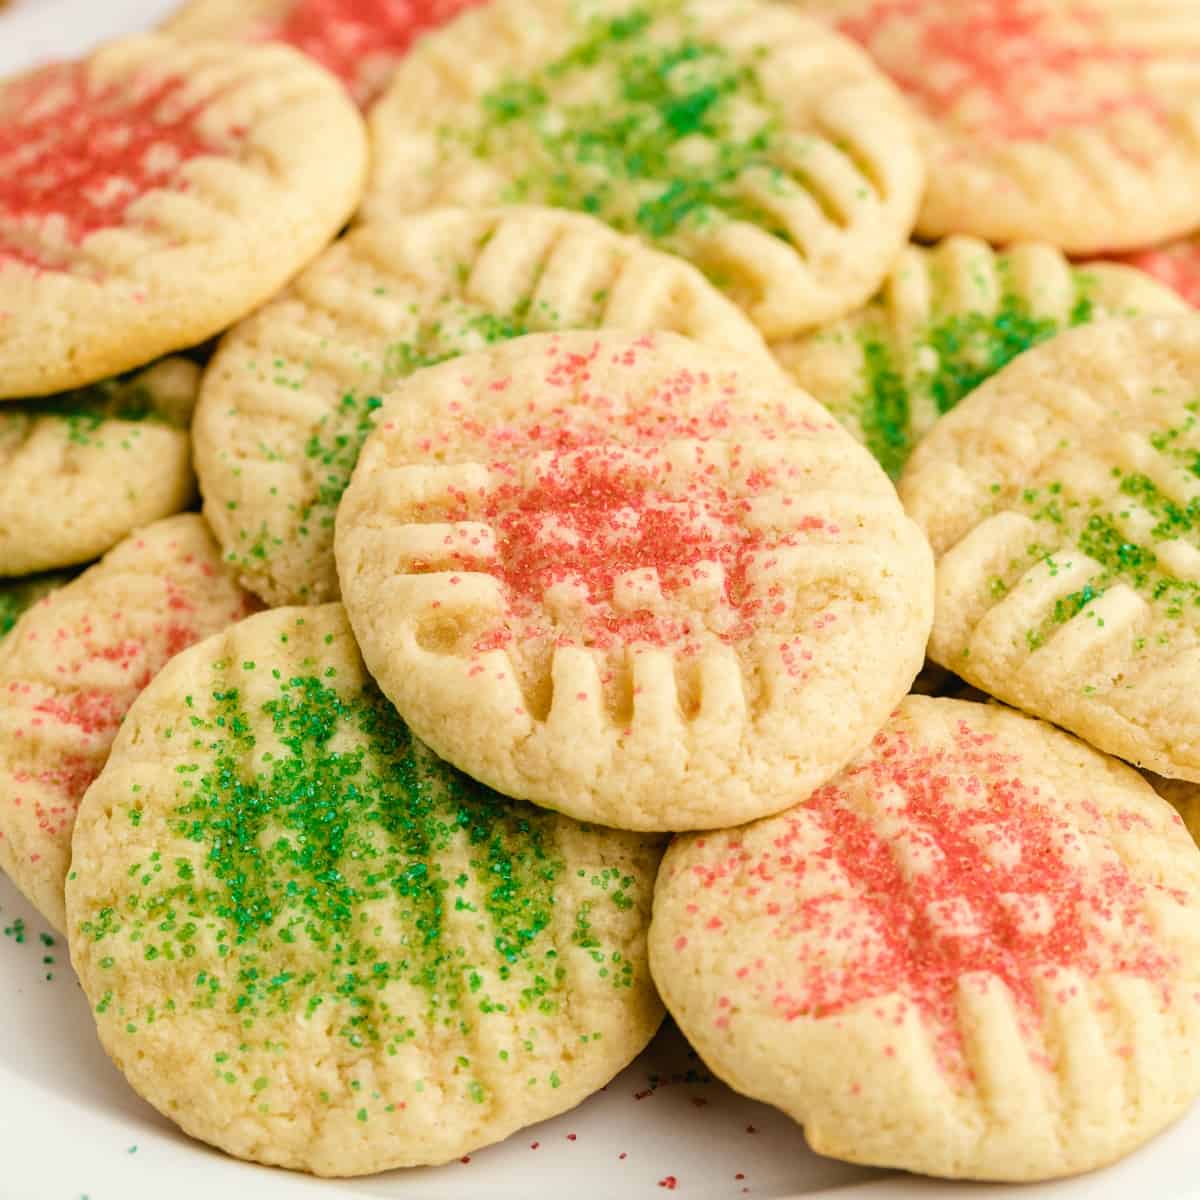 https://princesspinkygirl.com/wp-content/uploads/2020/11/Old-Fashioned-Christmas-Cookies-square.jpg